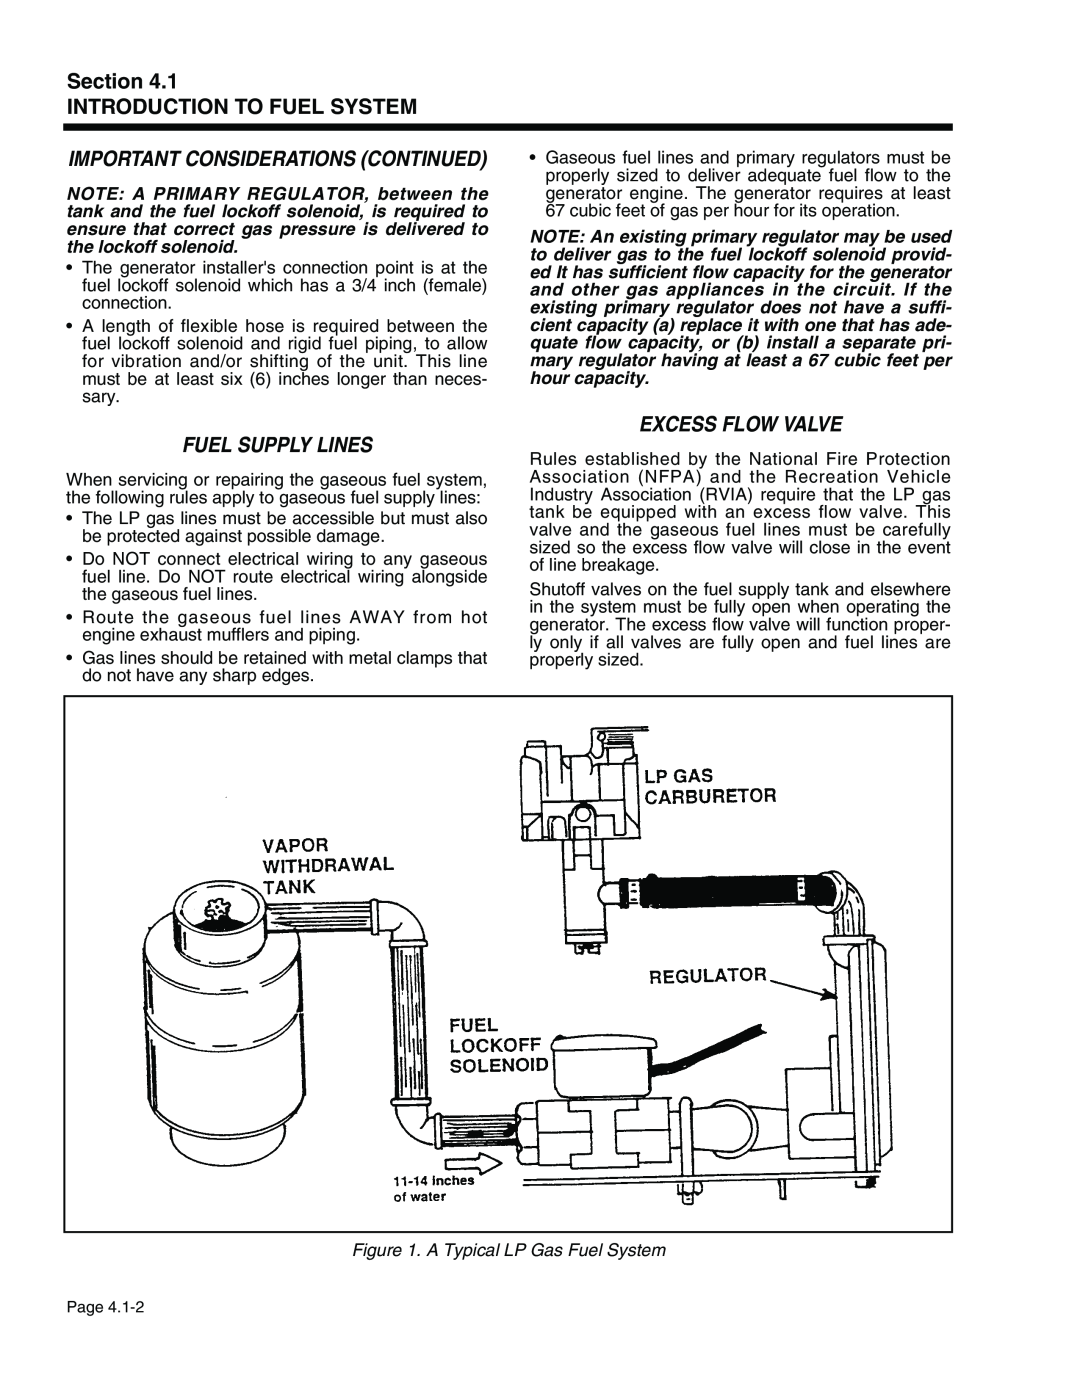 Generac Power Systems 940-2, 941-2 service manual Fuel Supply Lines, Excess Flow Valve, Important Considerations Continued 